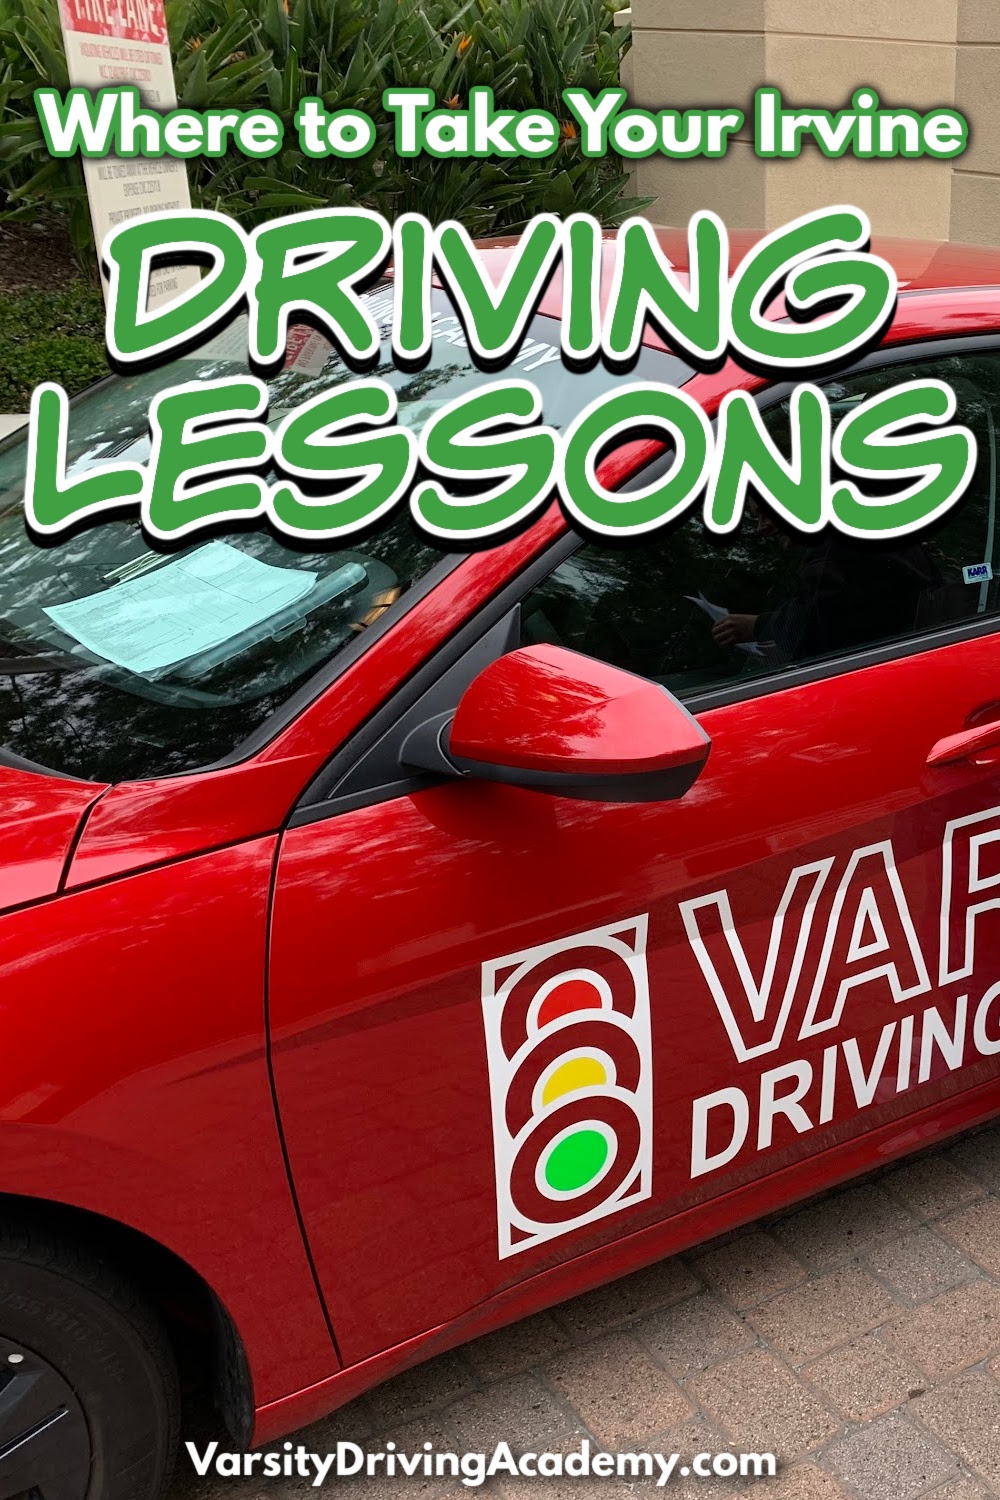 Varsity Driving Academy offers the best Irvine driving lessons for teens and adults who want or need to pass through Irvine drivers ed.